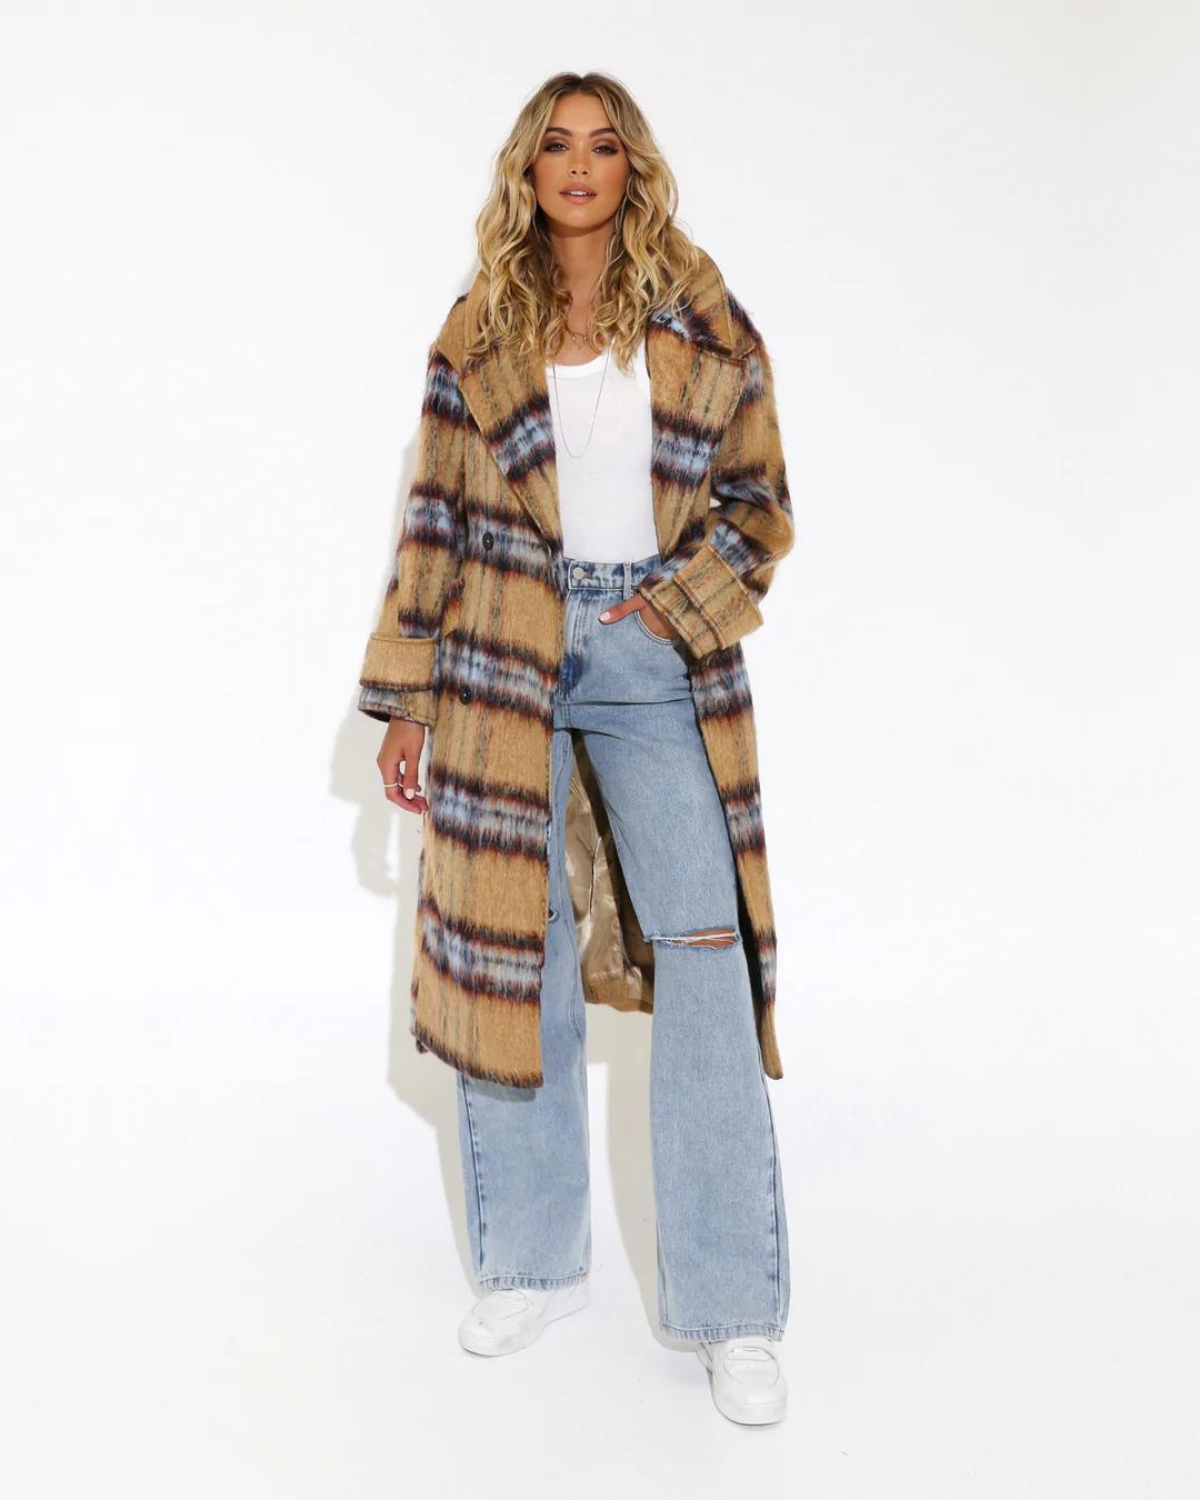 Asaley Coat - Camel Check | Madison the Label